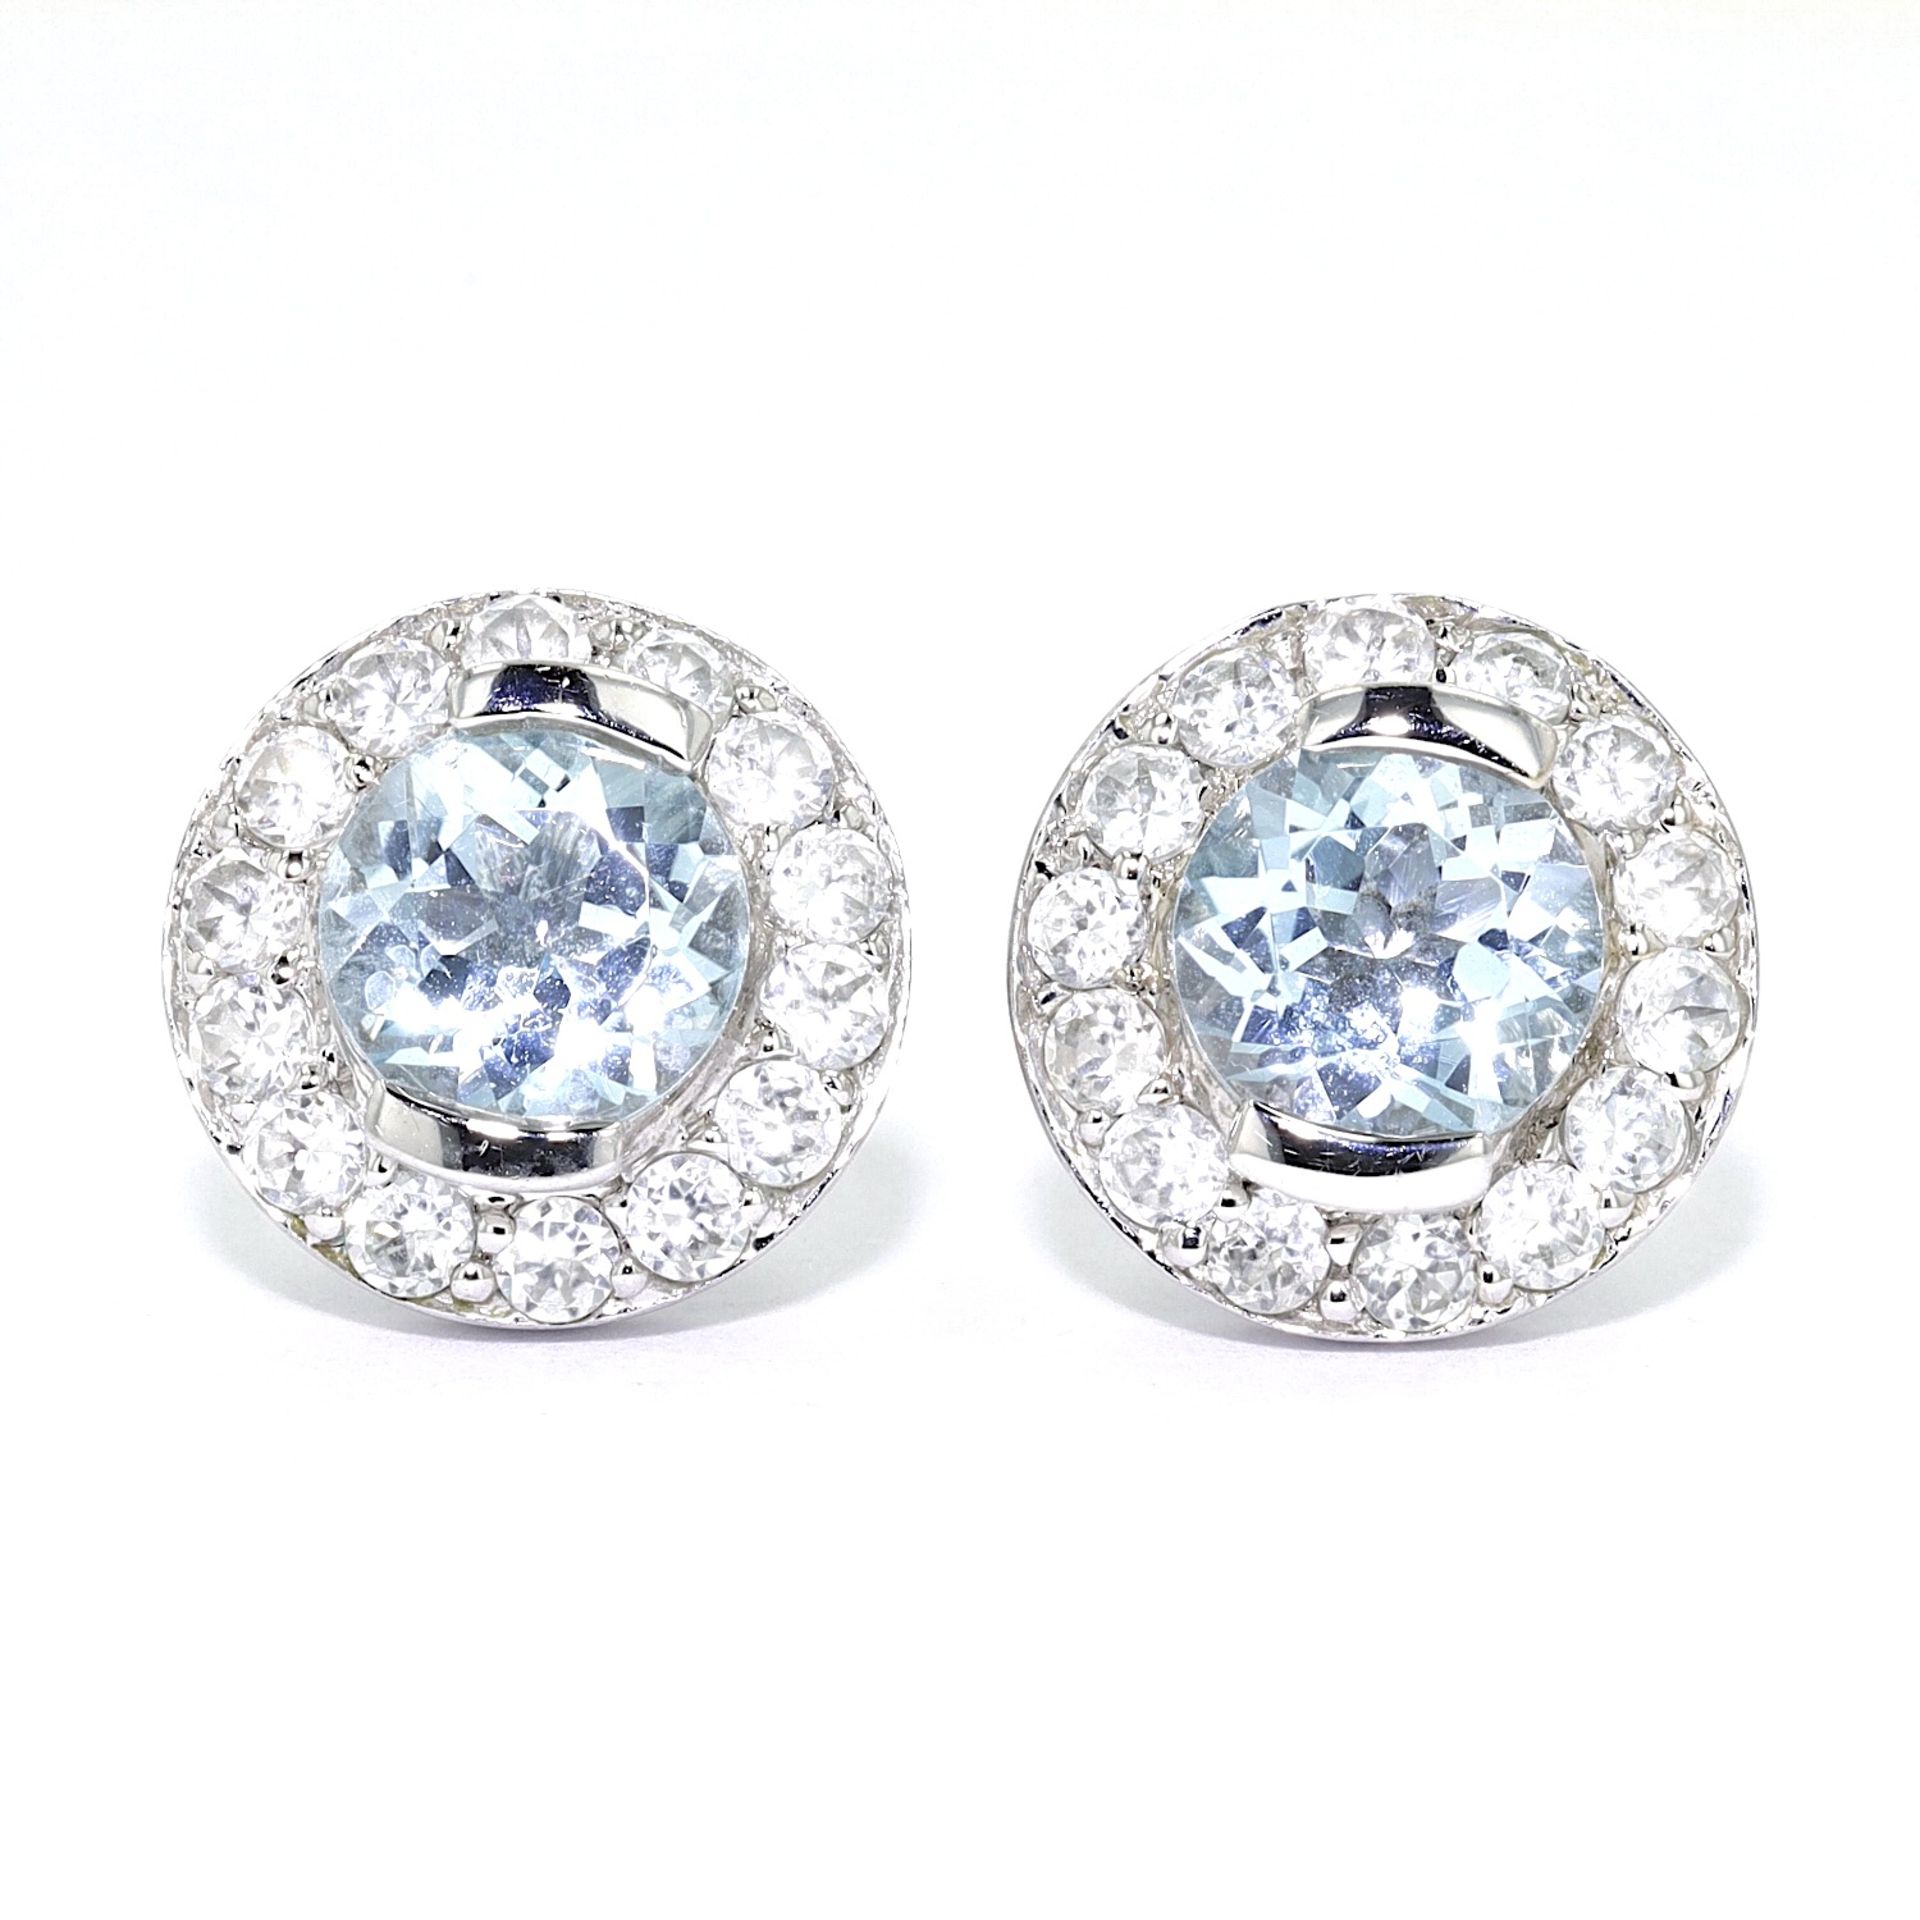 1 pair of stud earrings with topazes and zirconia